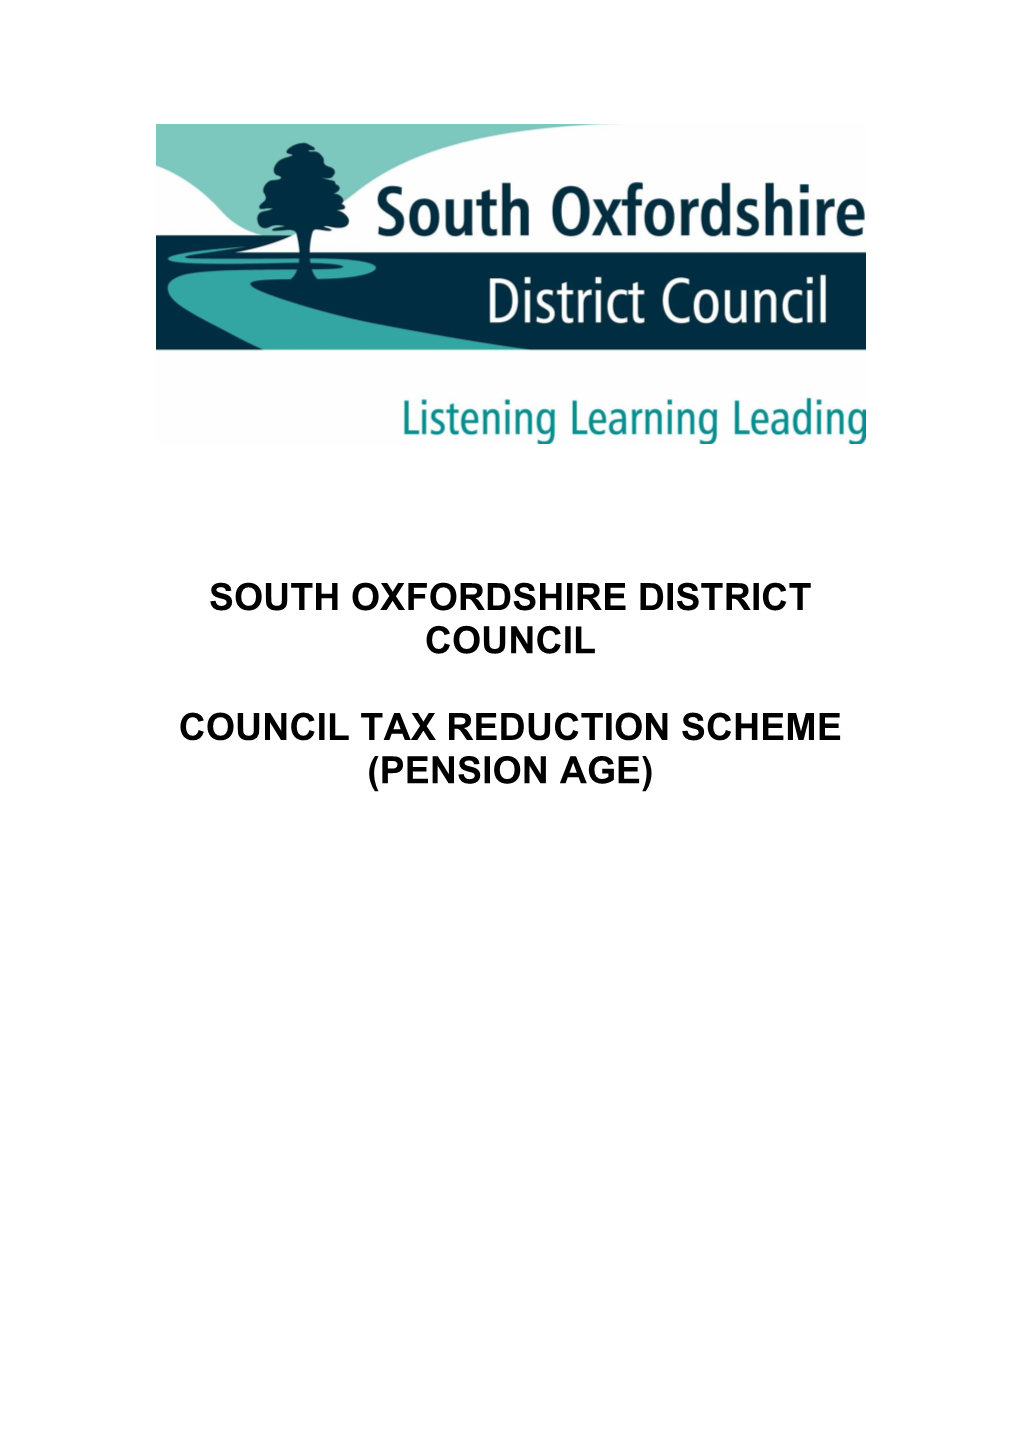 Council Tax Reduction Scheme Policy – for People of Pension